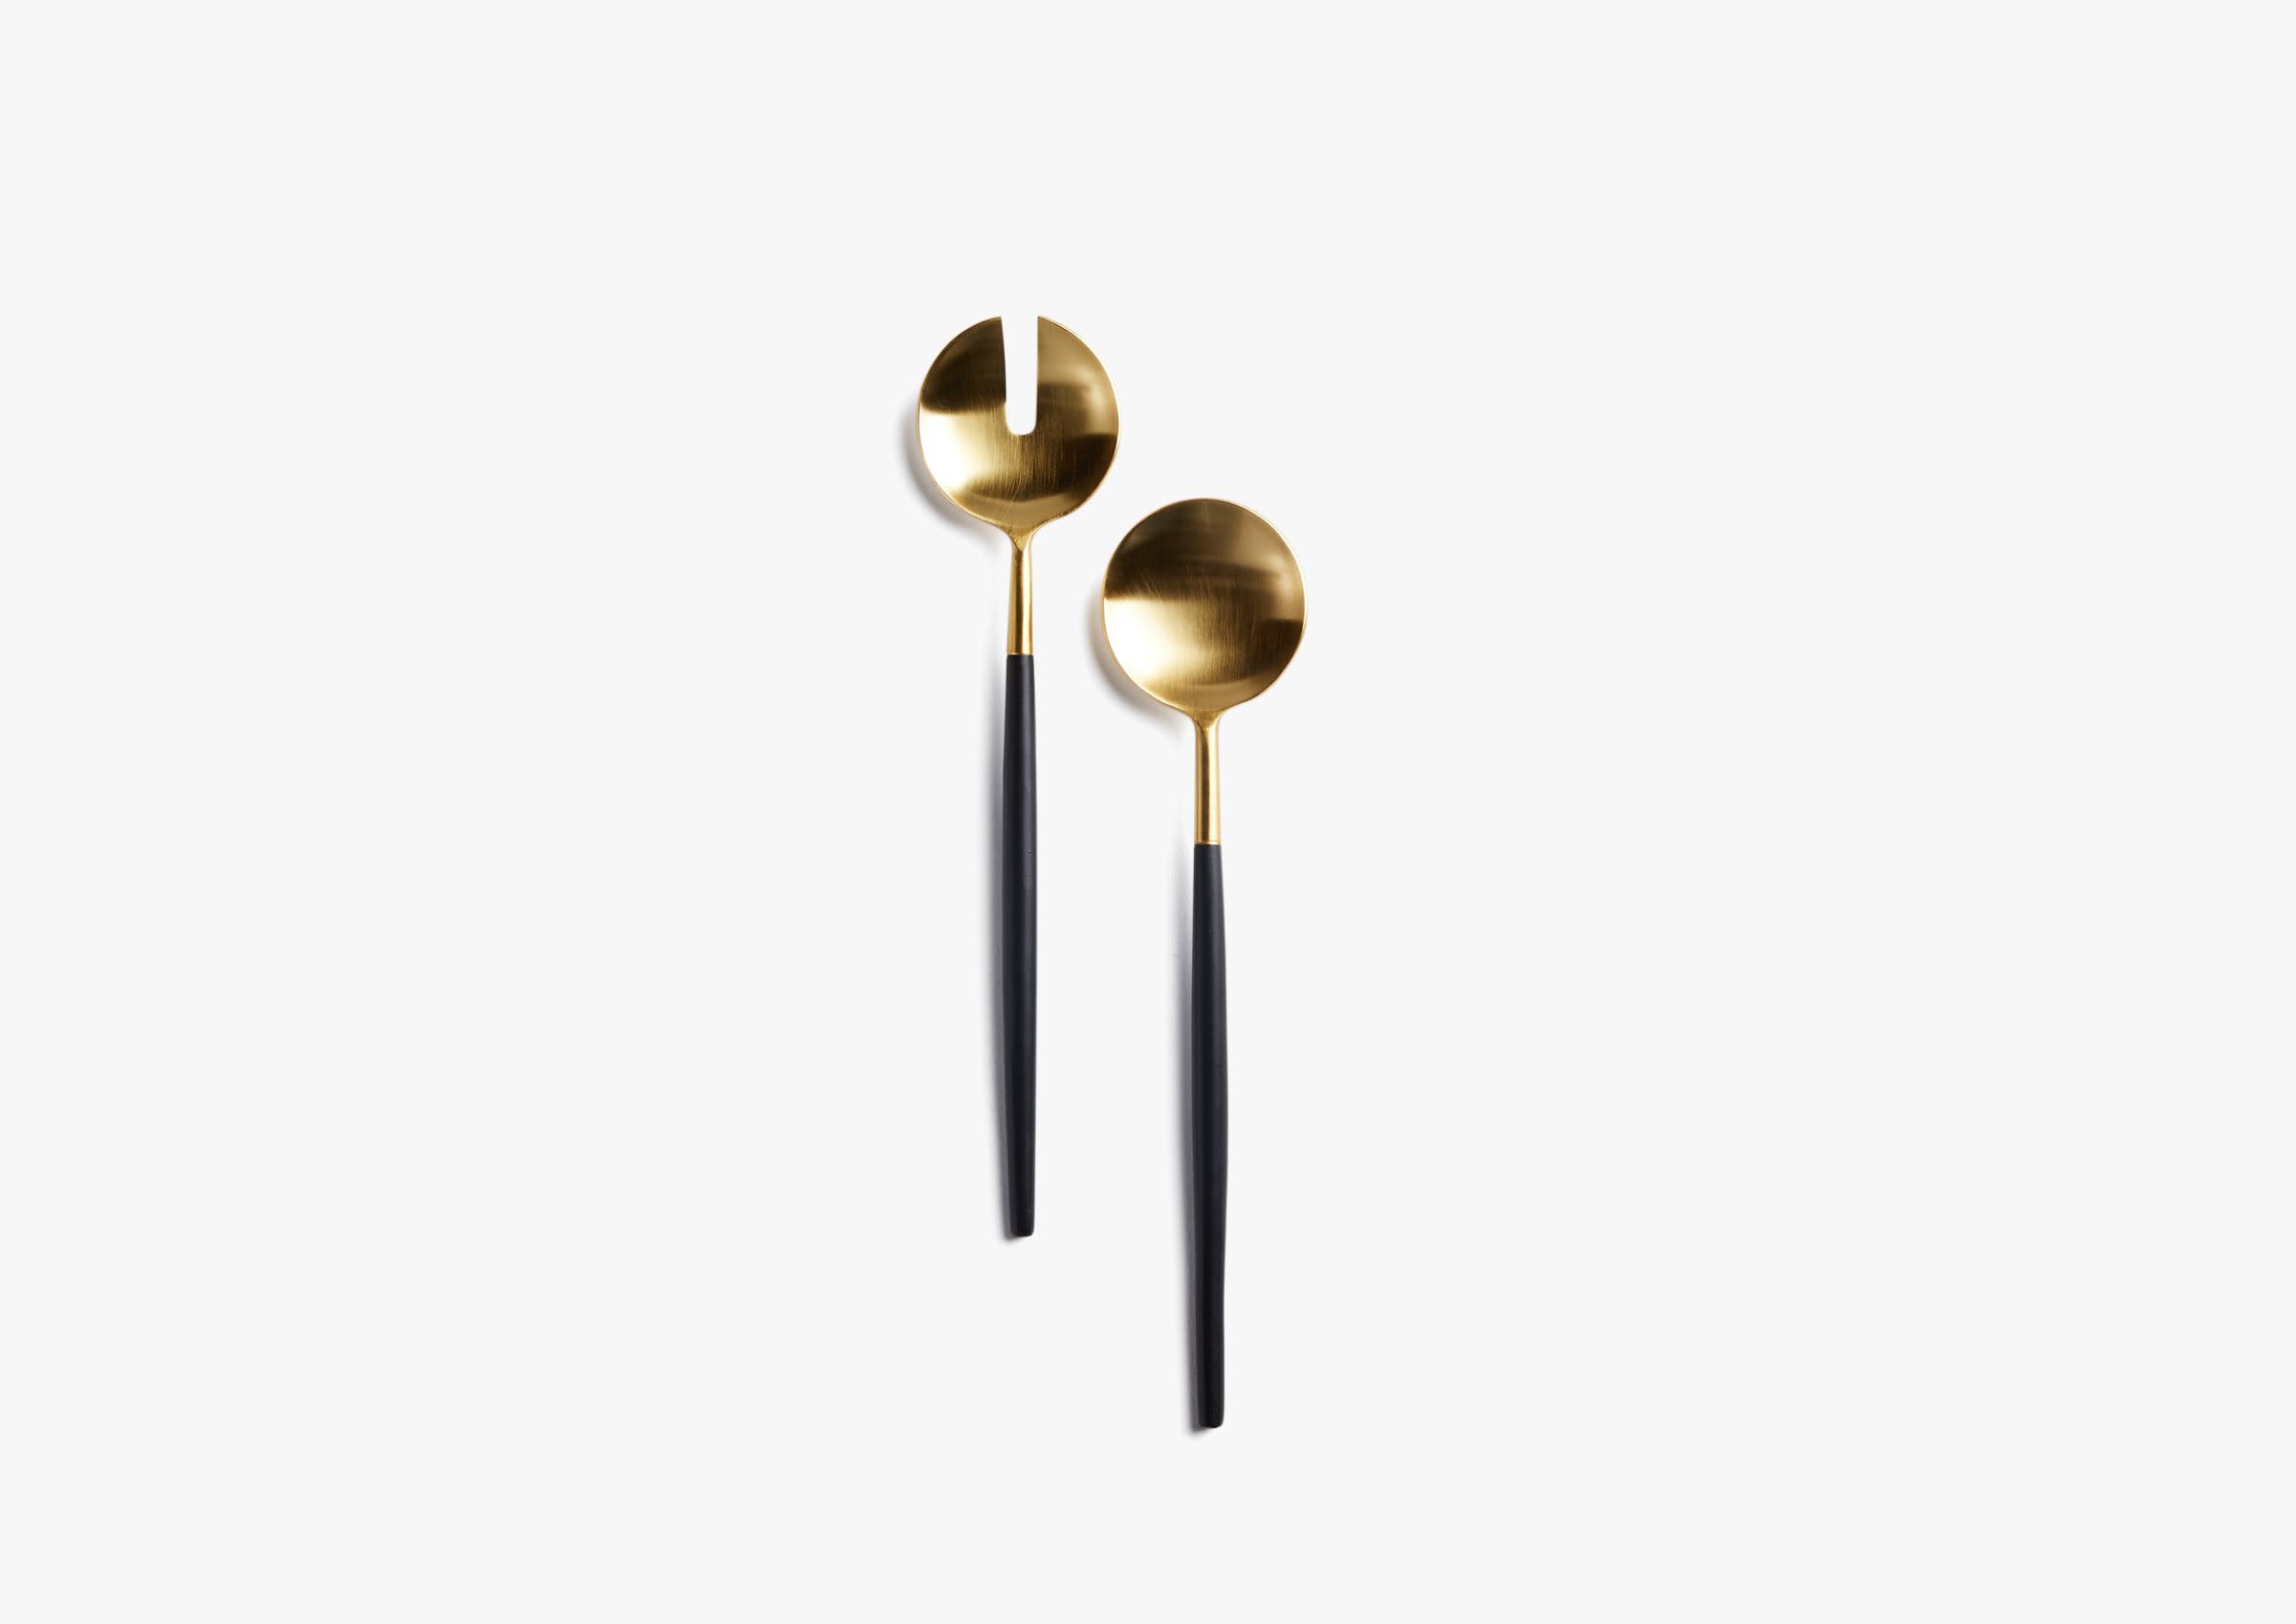 Black And Gold Serving Set Product Image